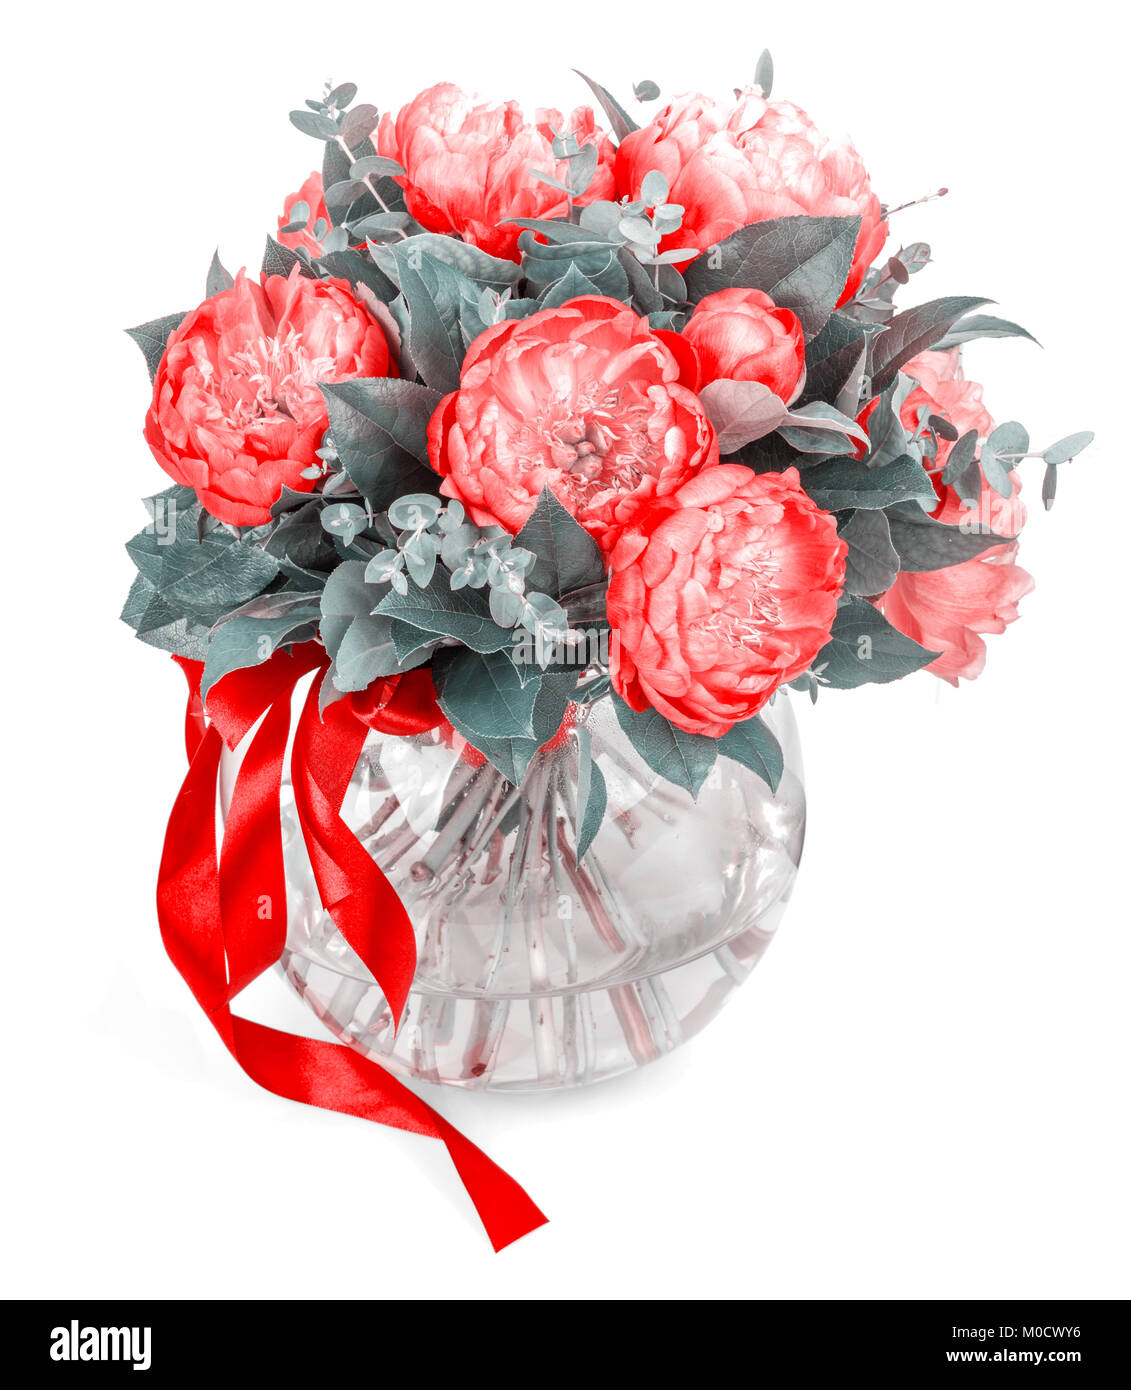 Amazing bouquet of pink pions on white background Stock Photo